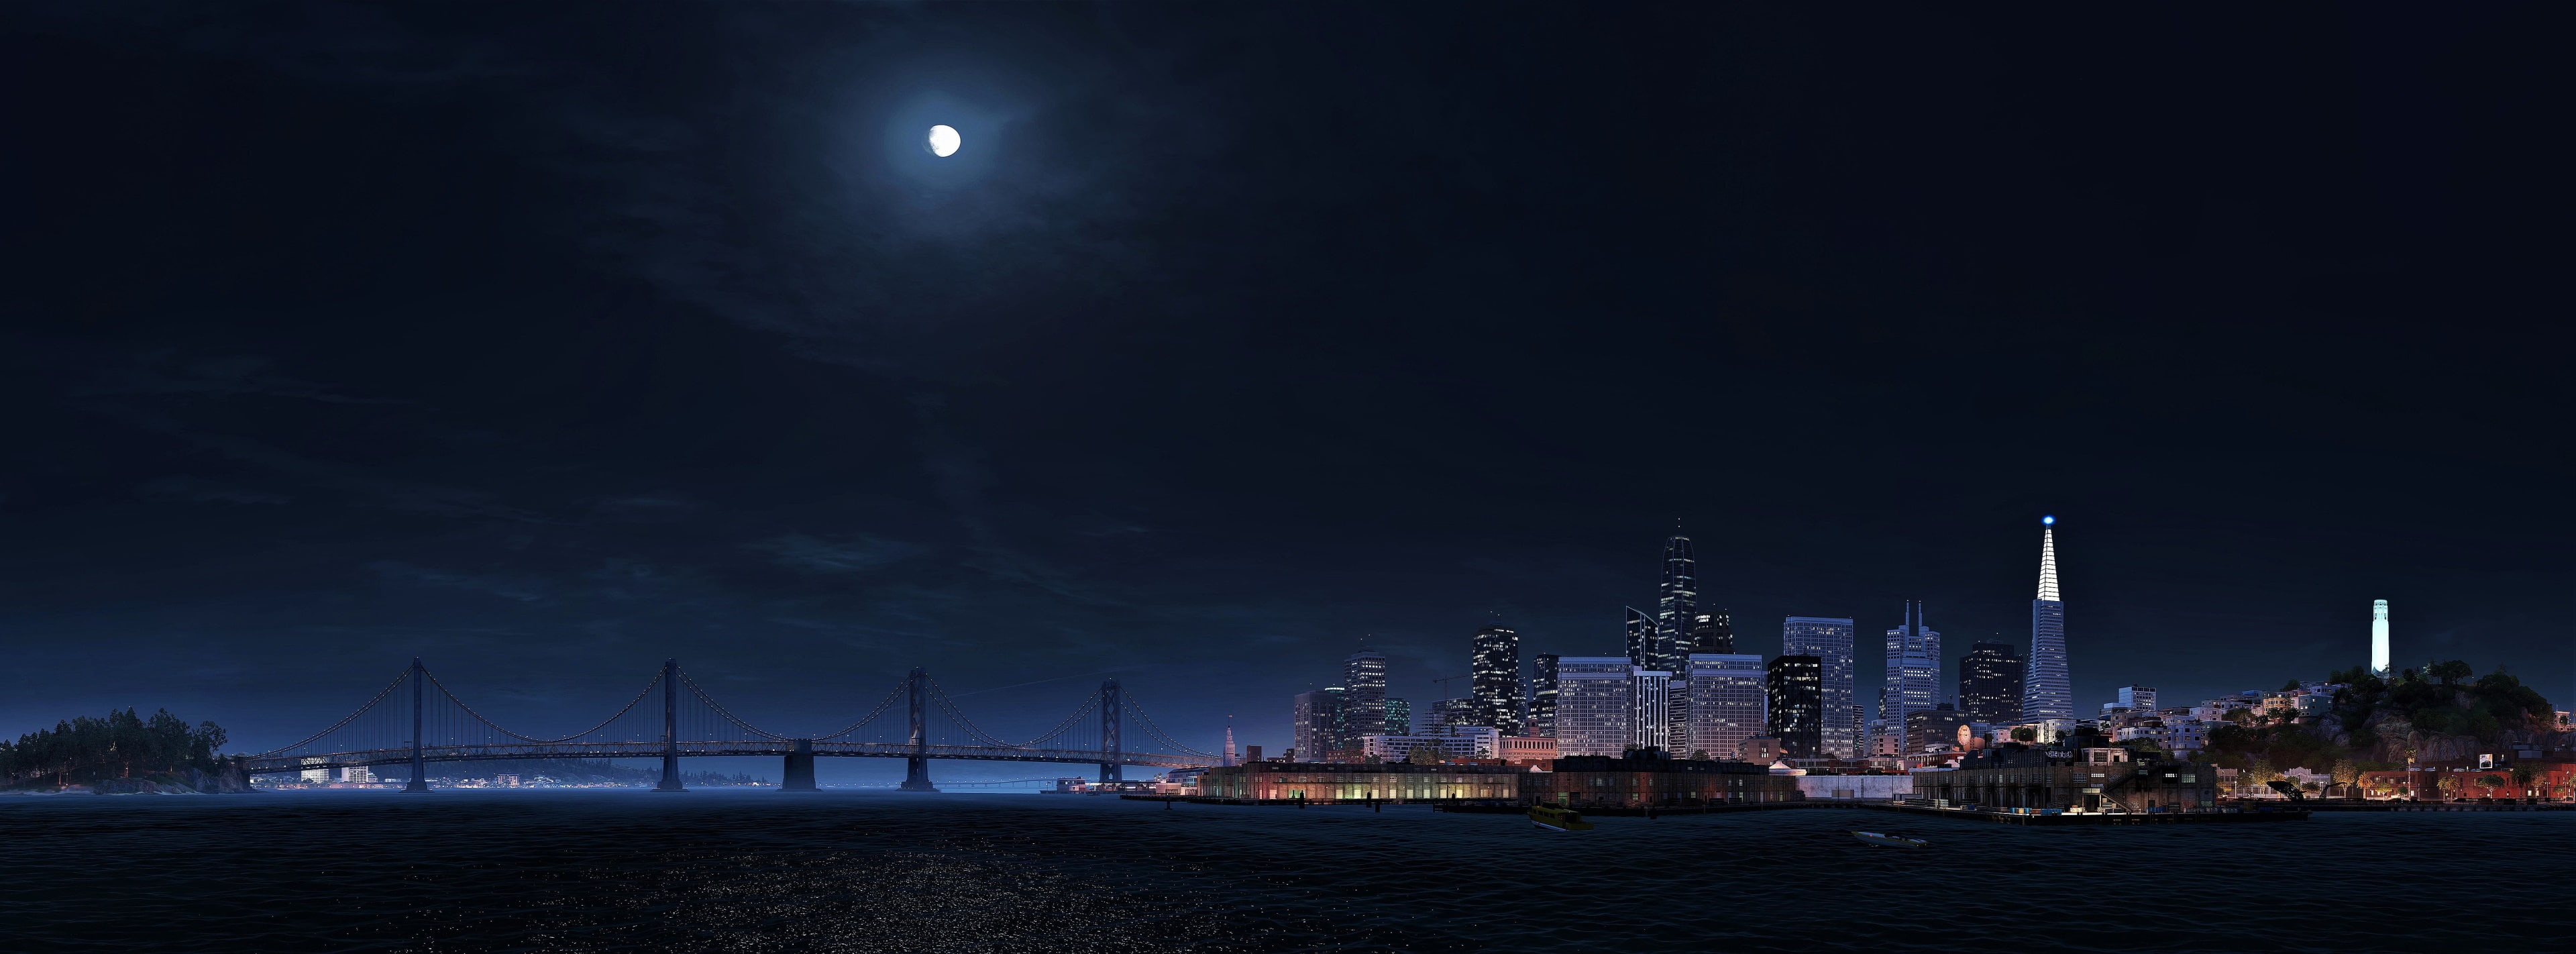 watch dogs 2 4k background  hd, night, sky, architecture, moon